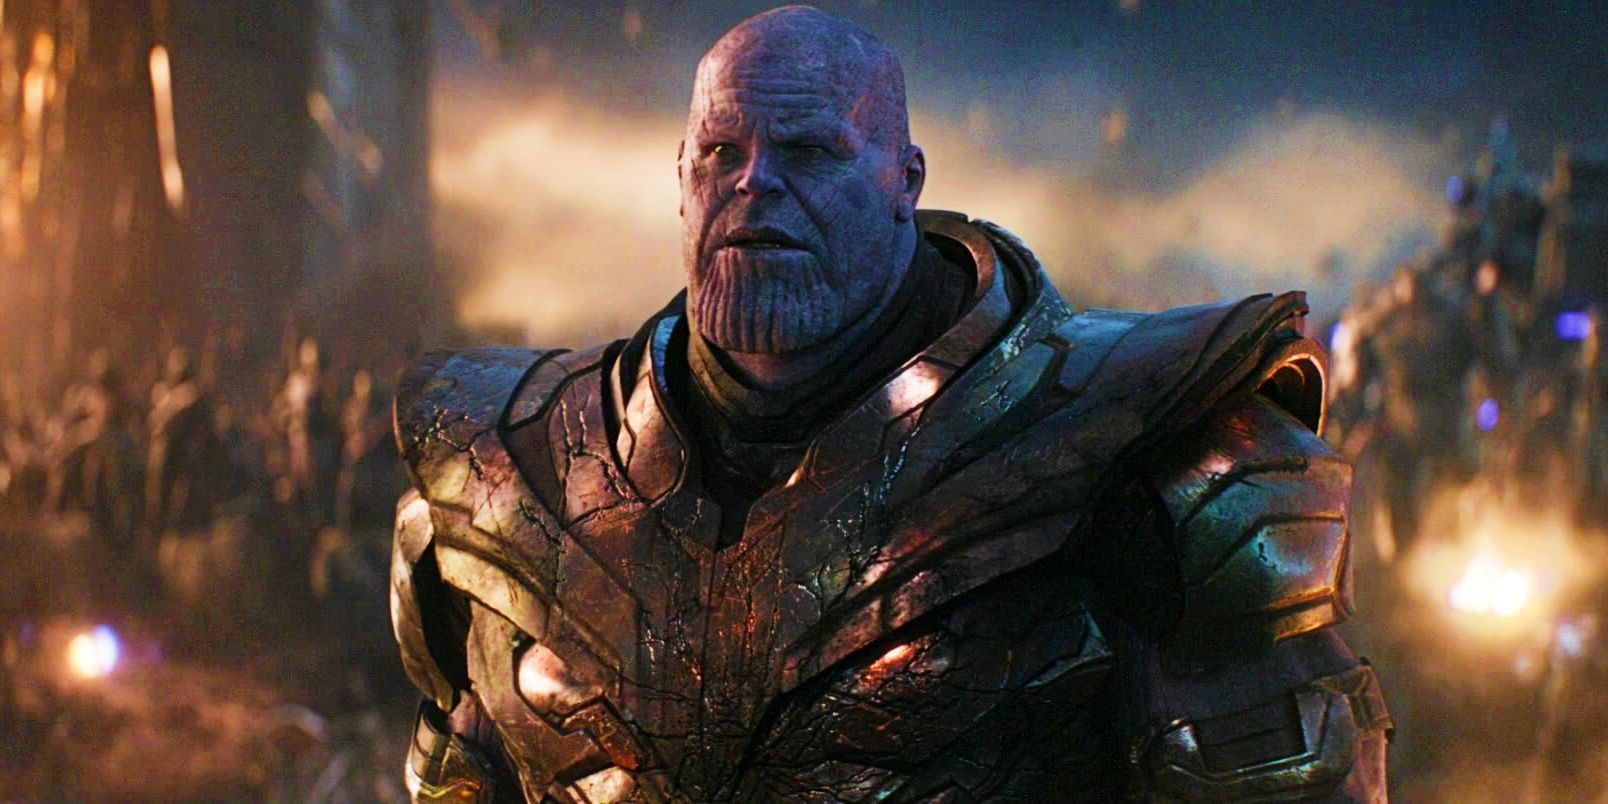 Thanos standing in front of army in Avengers Endgame final battle